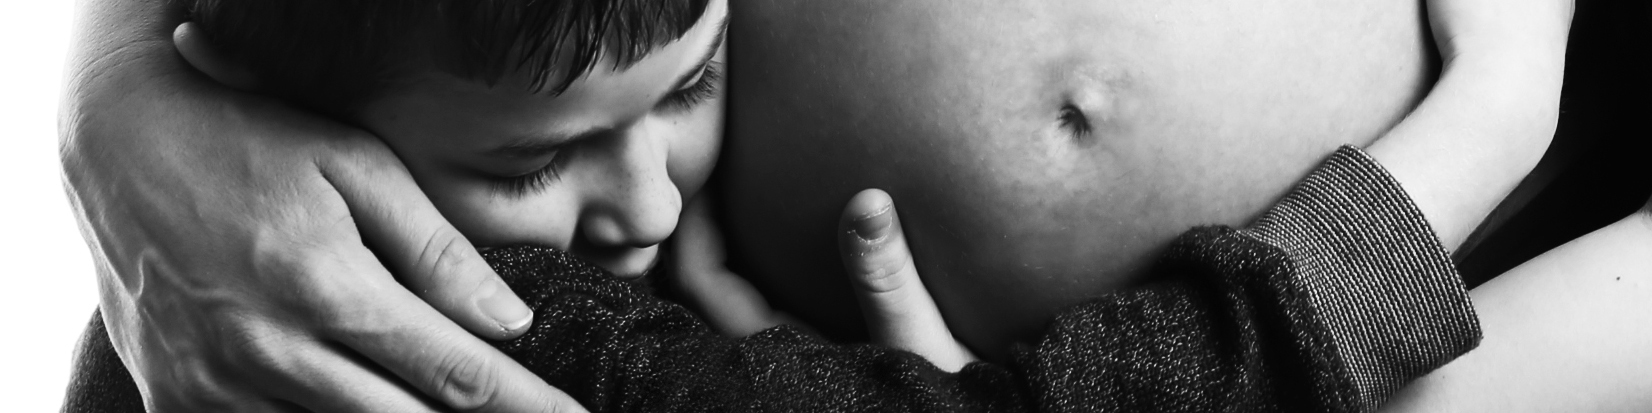 Black and white photograph of a child hugging his mother's pregnant tummy